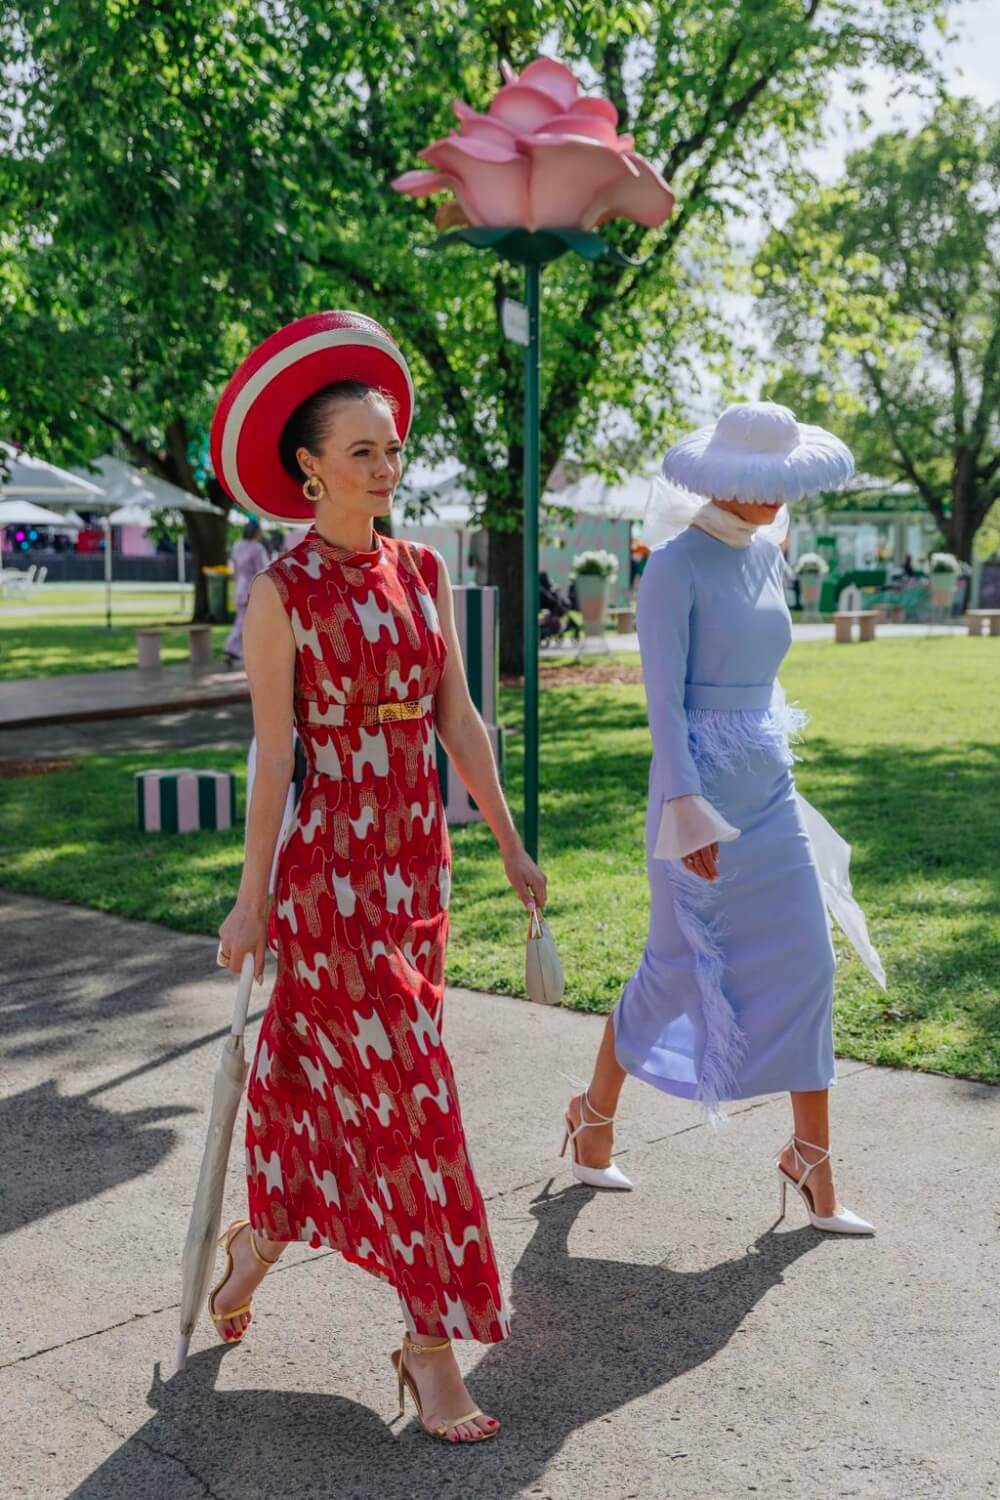 Women in Dresses at Melbourne Cup Carnival